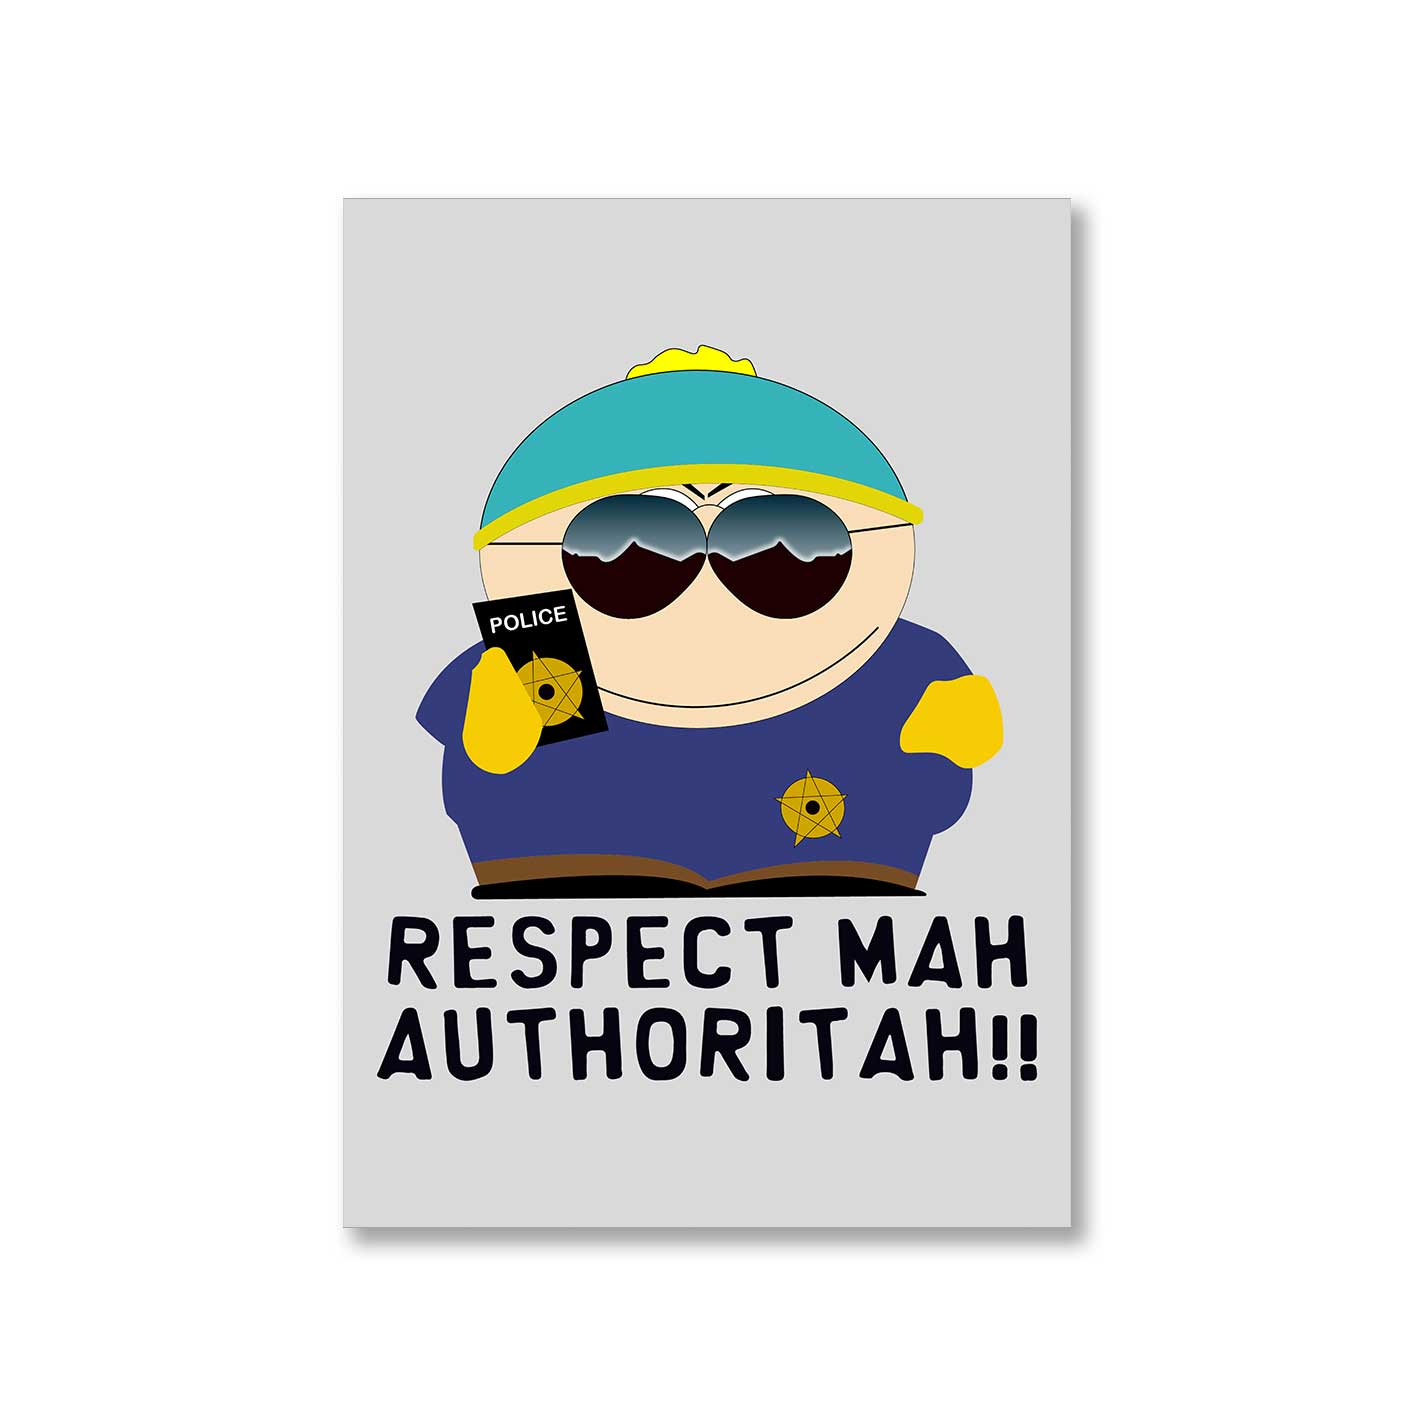 south park respect mah authoritah poster wall art buy online united states of america usa the banyan tee tbt a4 south park kenny cartman stan kyle cartoon character illustration